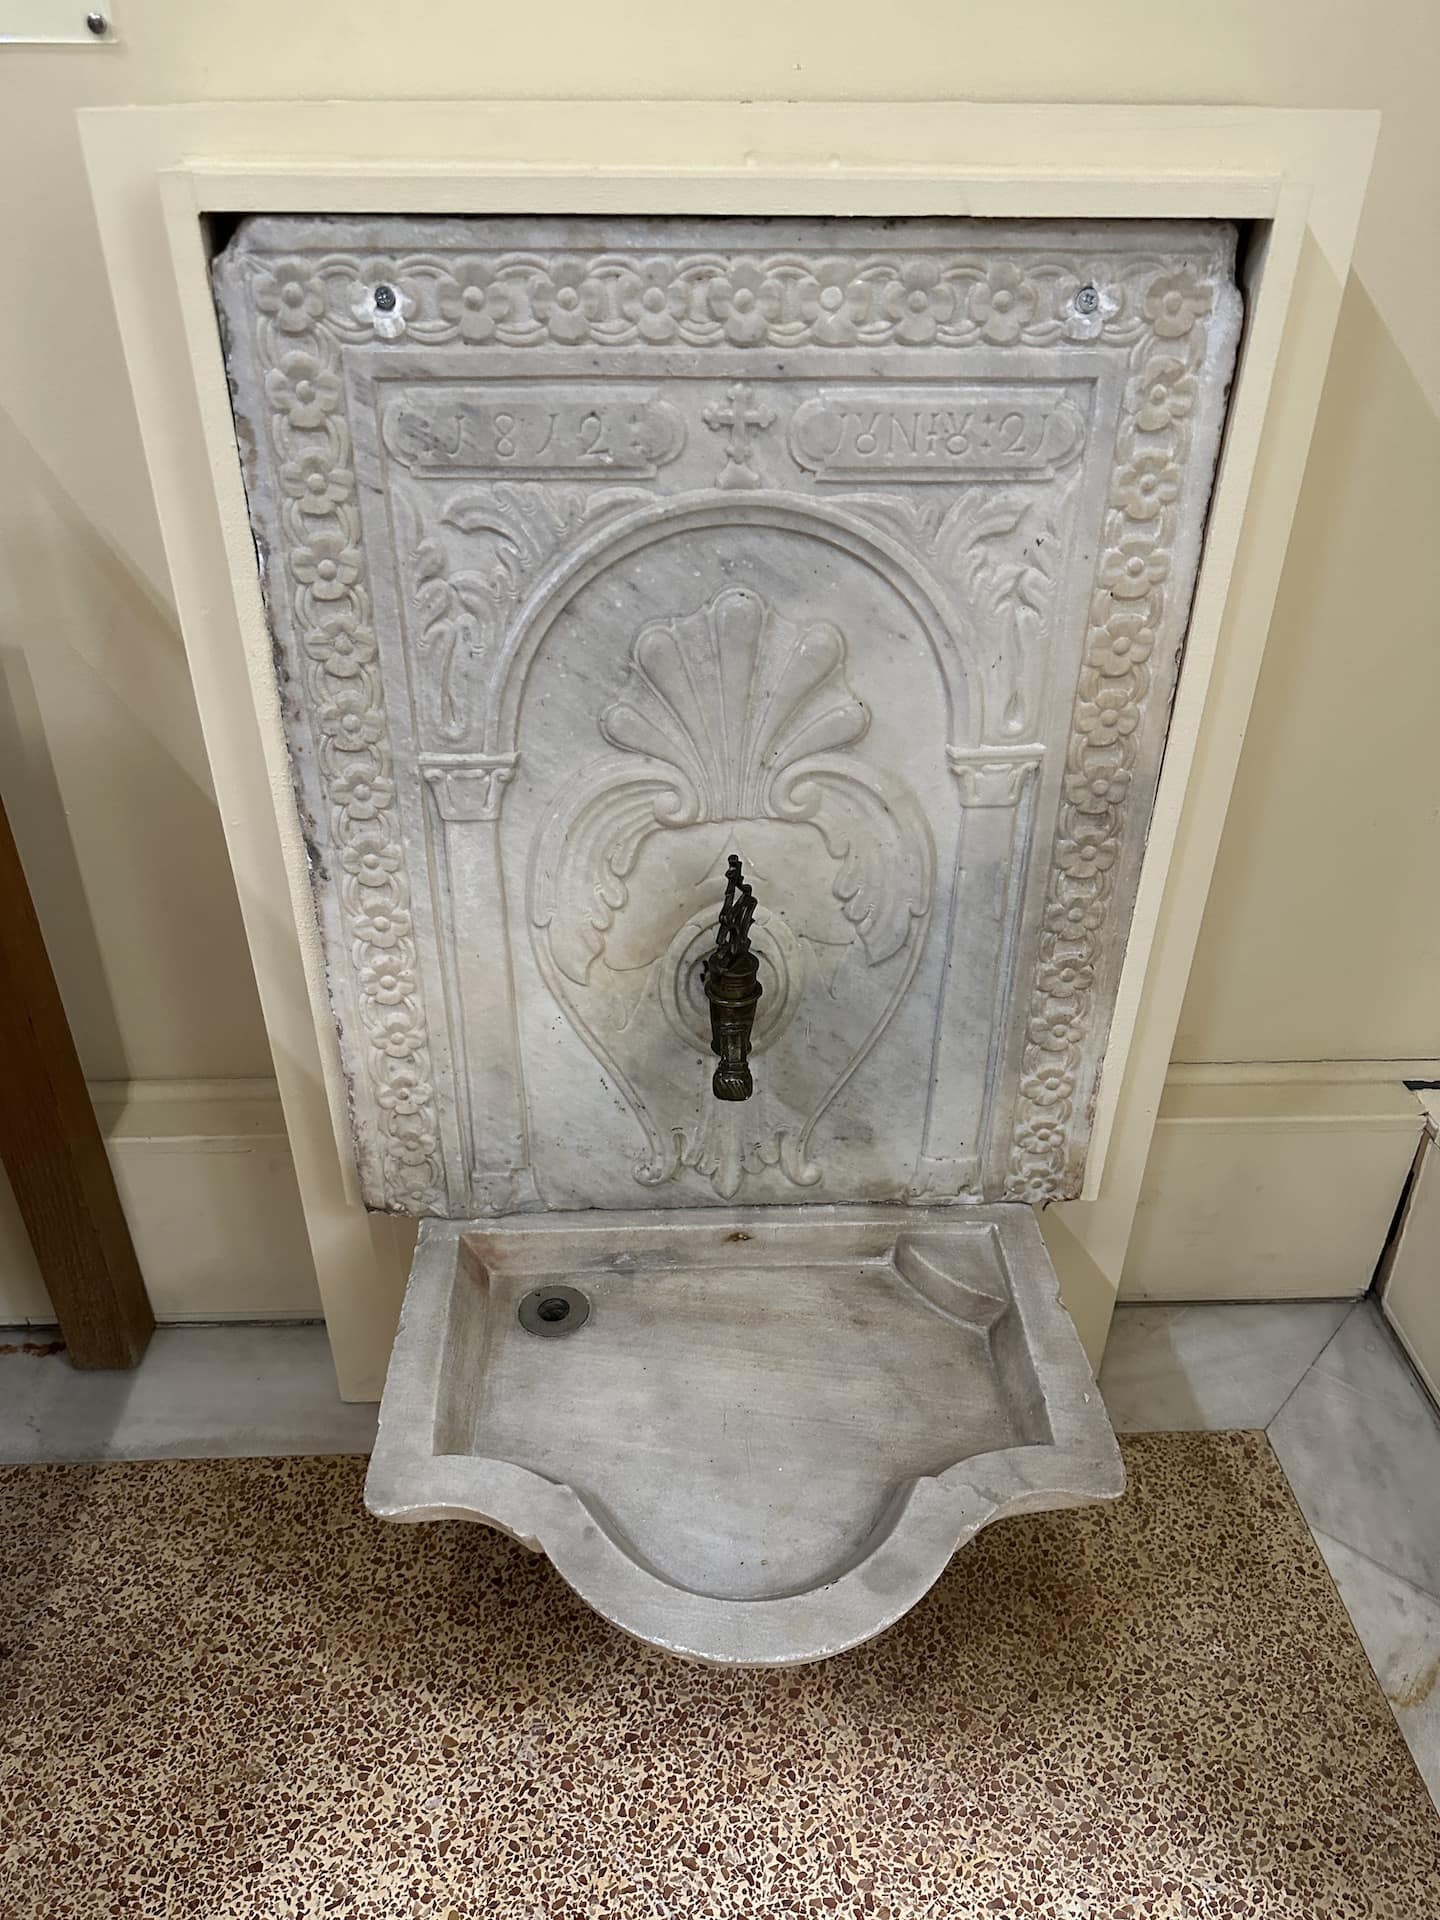 Fountain from the home of Admiral Andreas Miaoulis (1765-1835) in Hydra, marble, 1812 at the National Historical Museum in Athens, Greece